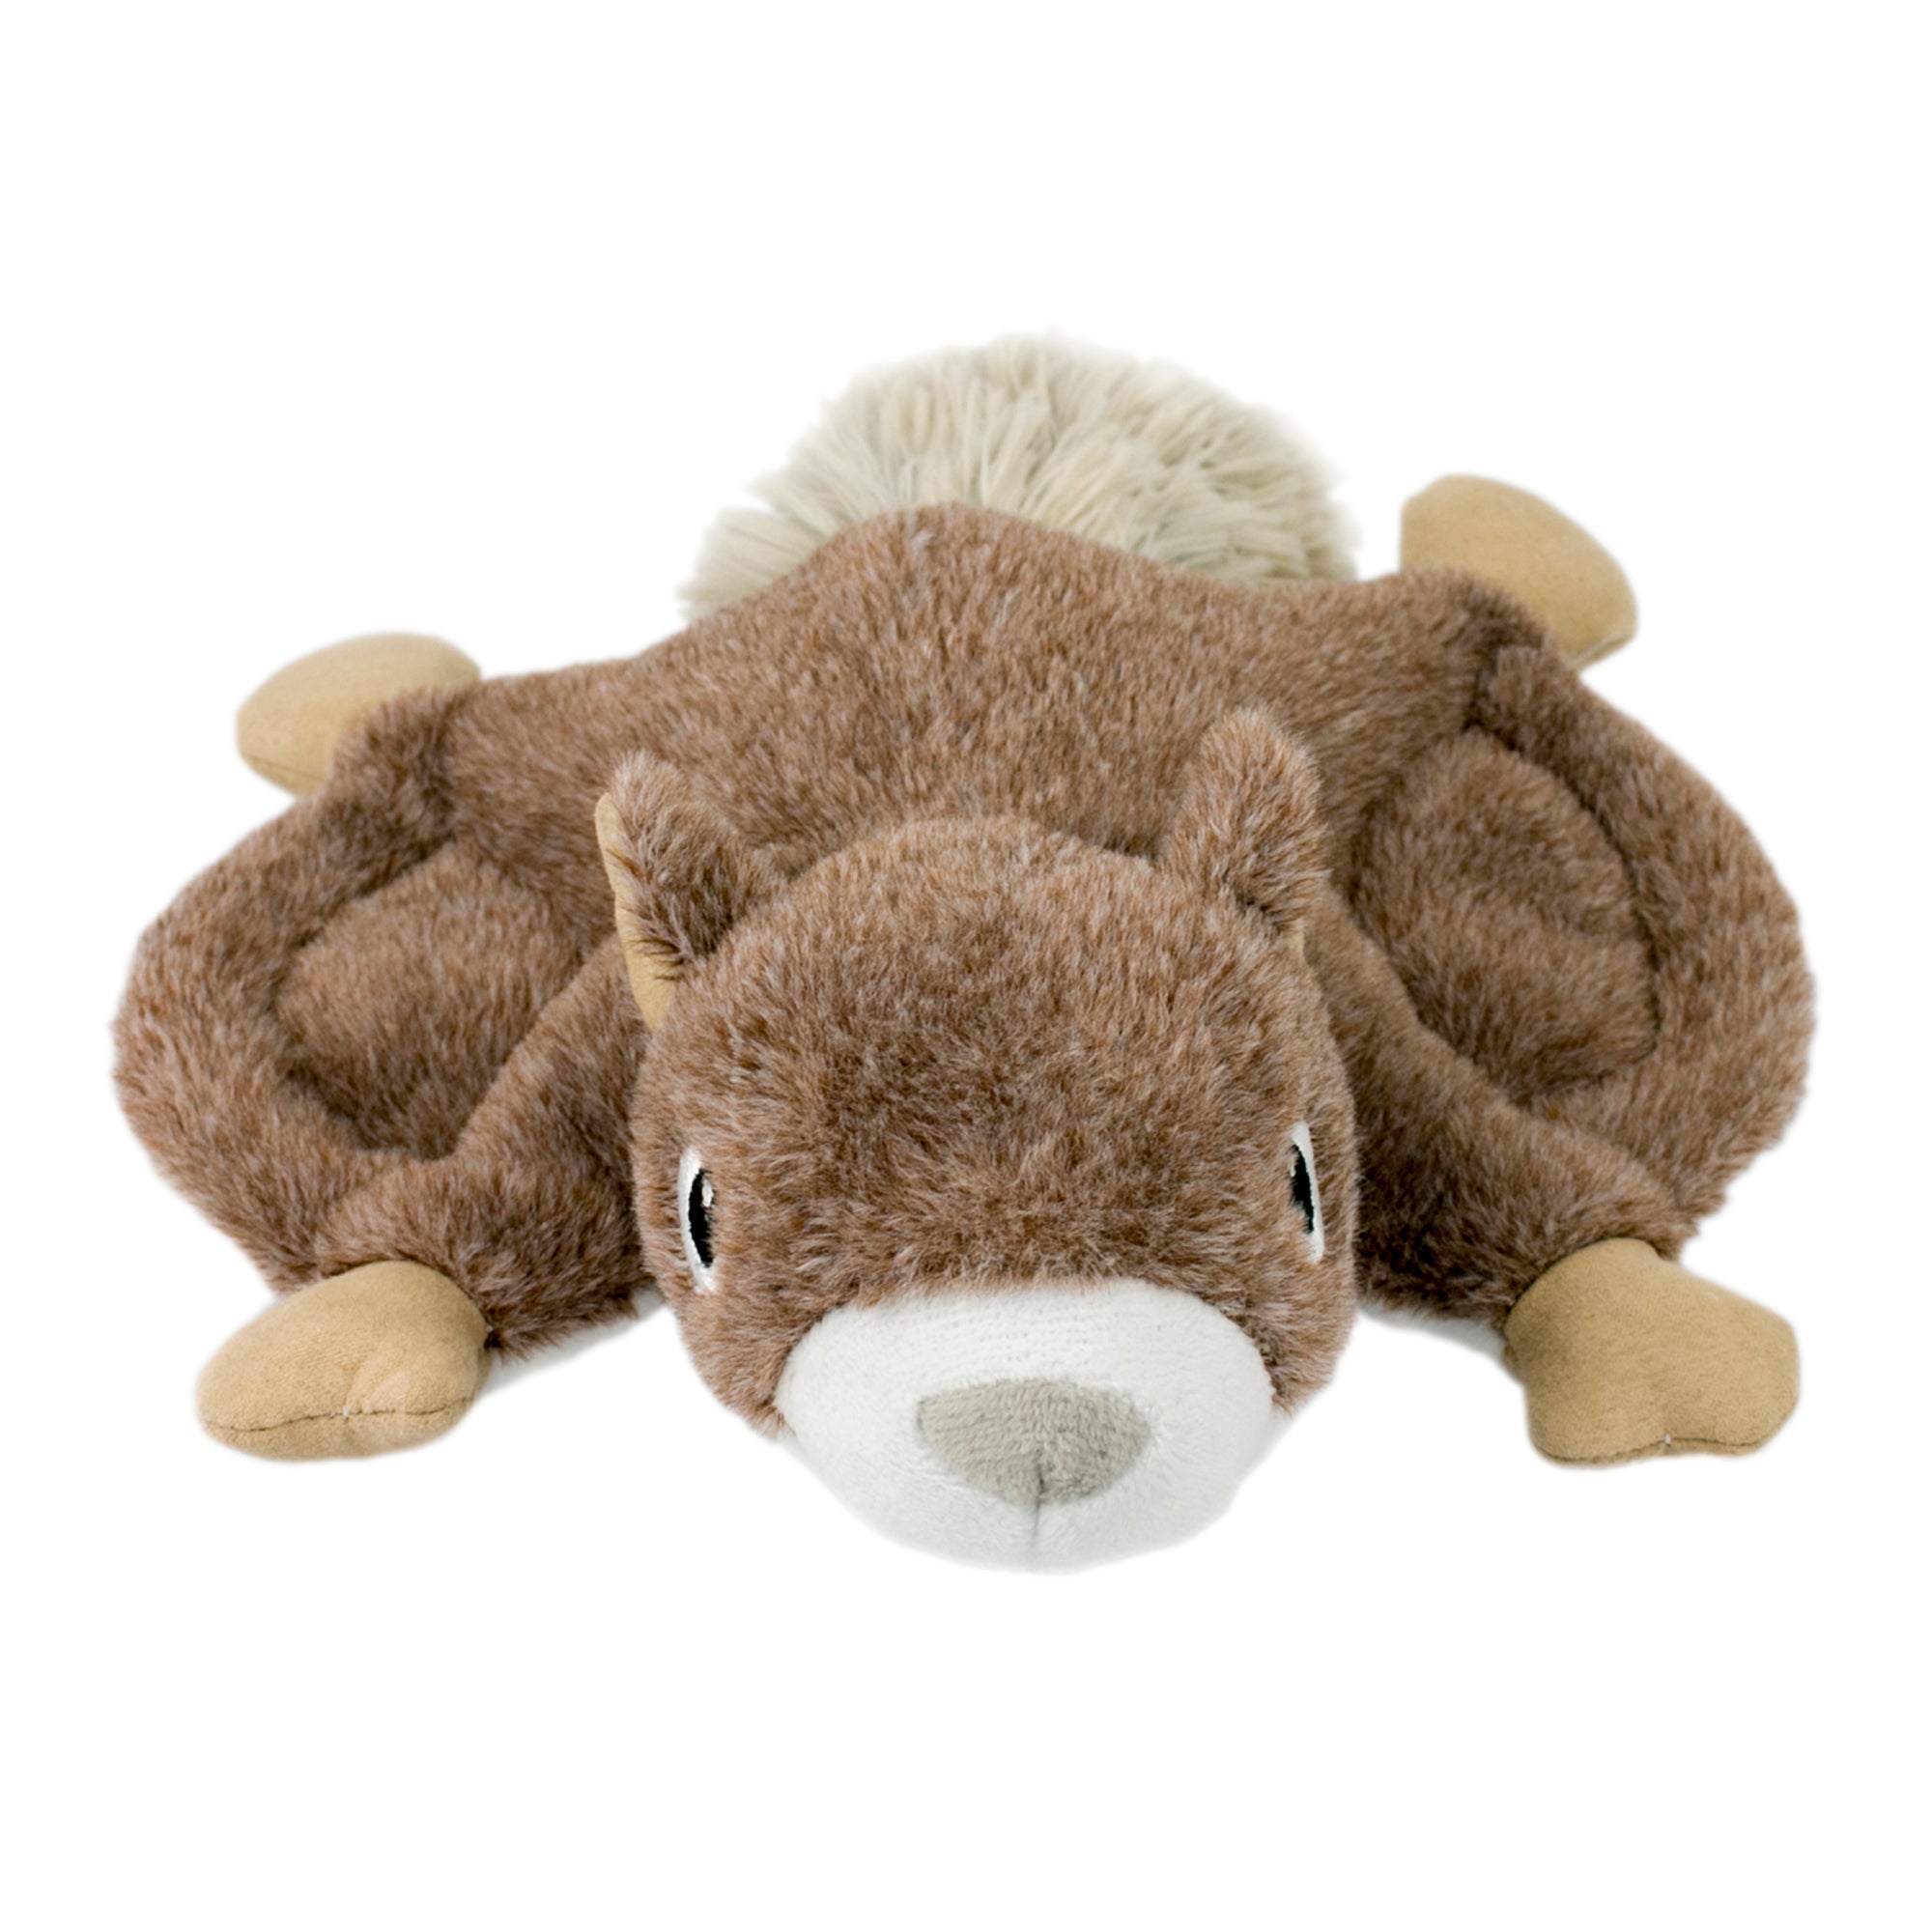 Squeaky Plush Dog Toy: Flying Squirrel